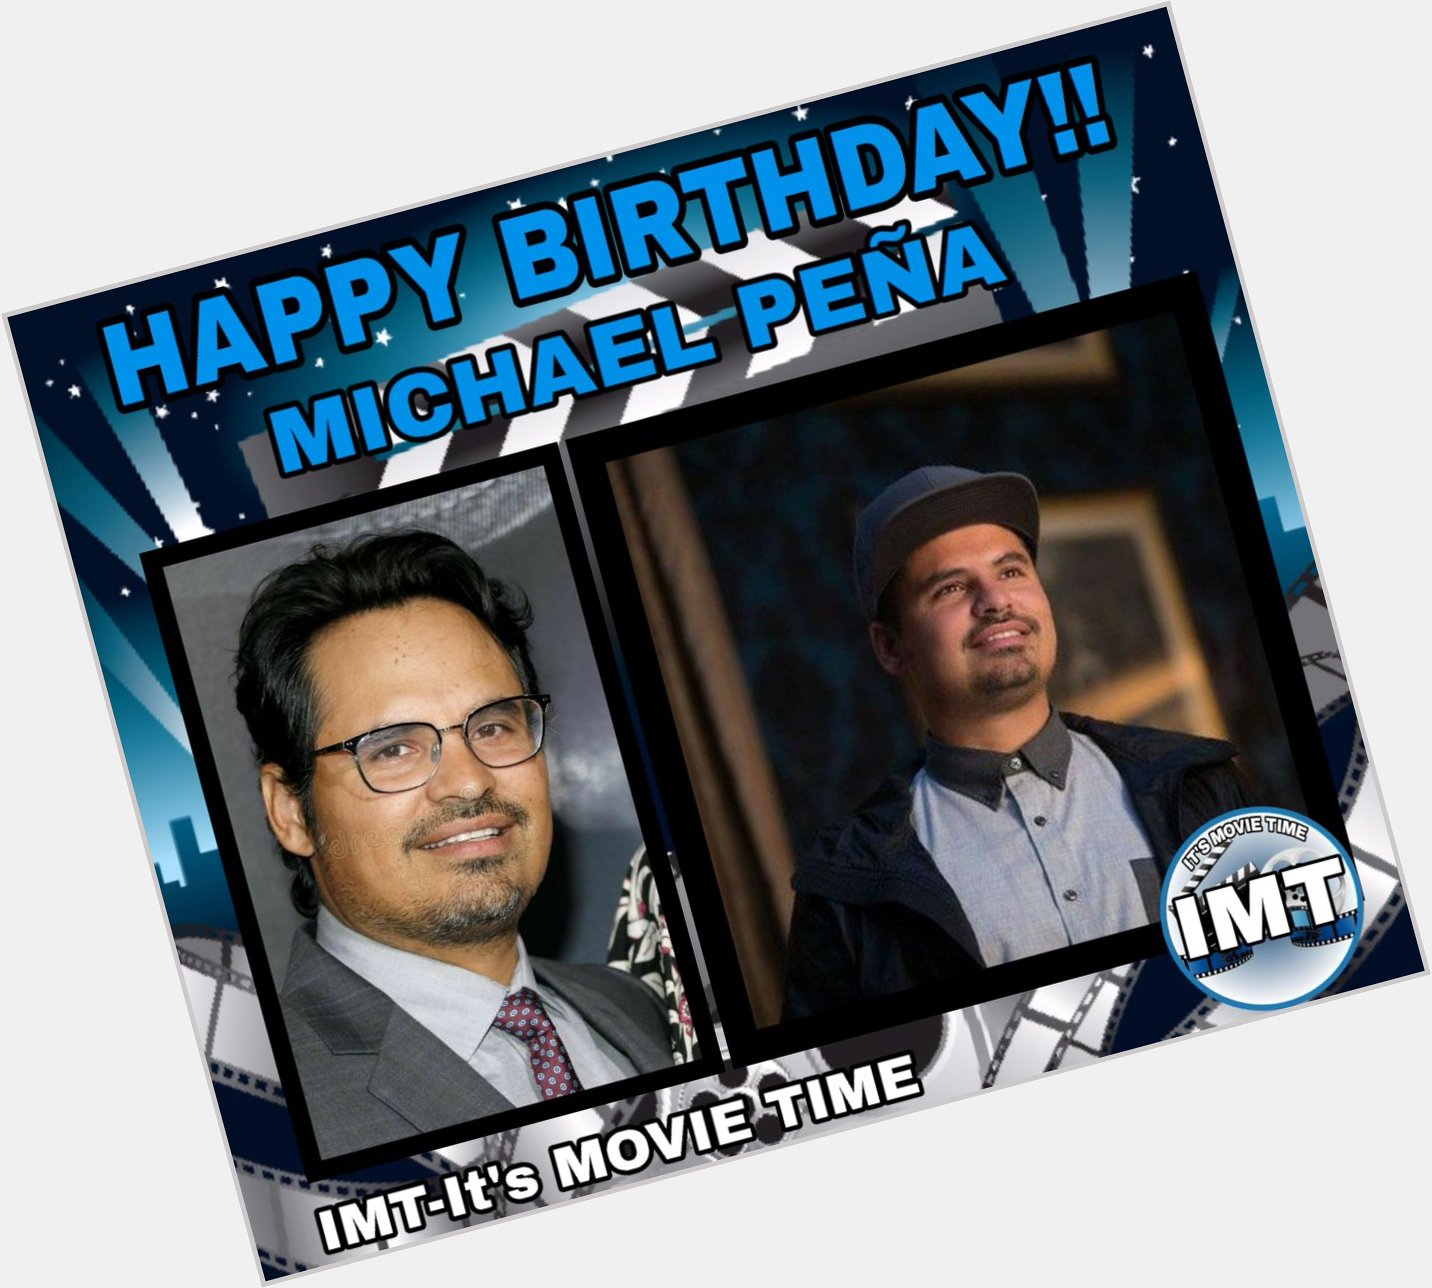 Happy Birthday to Michael Peña! The actor is celebrating 44 years. 